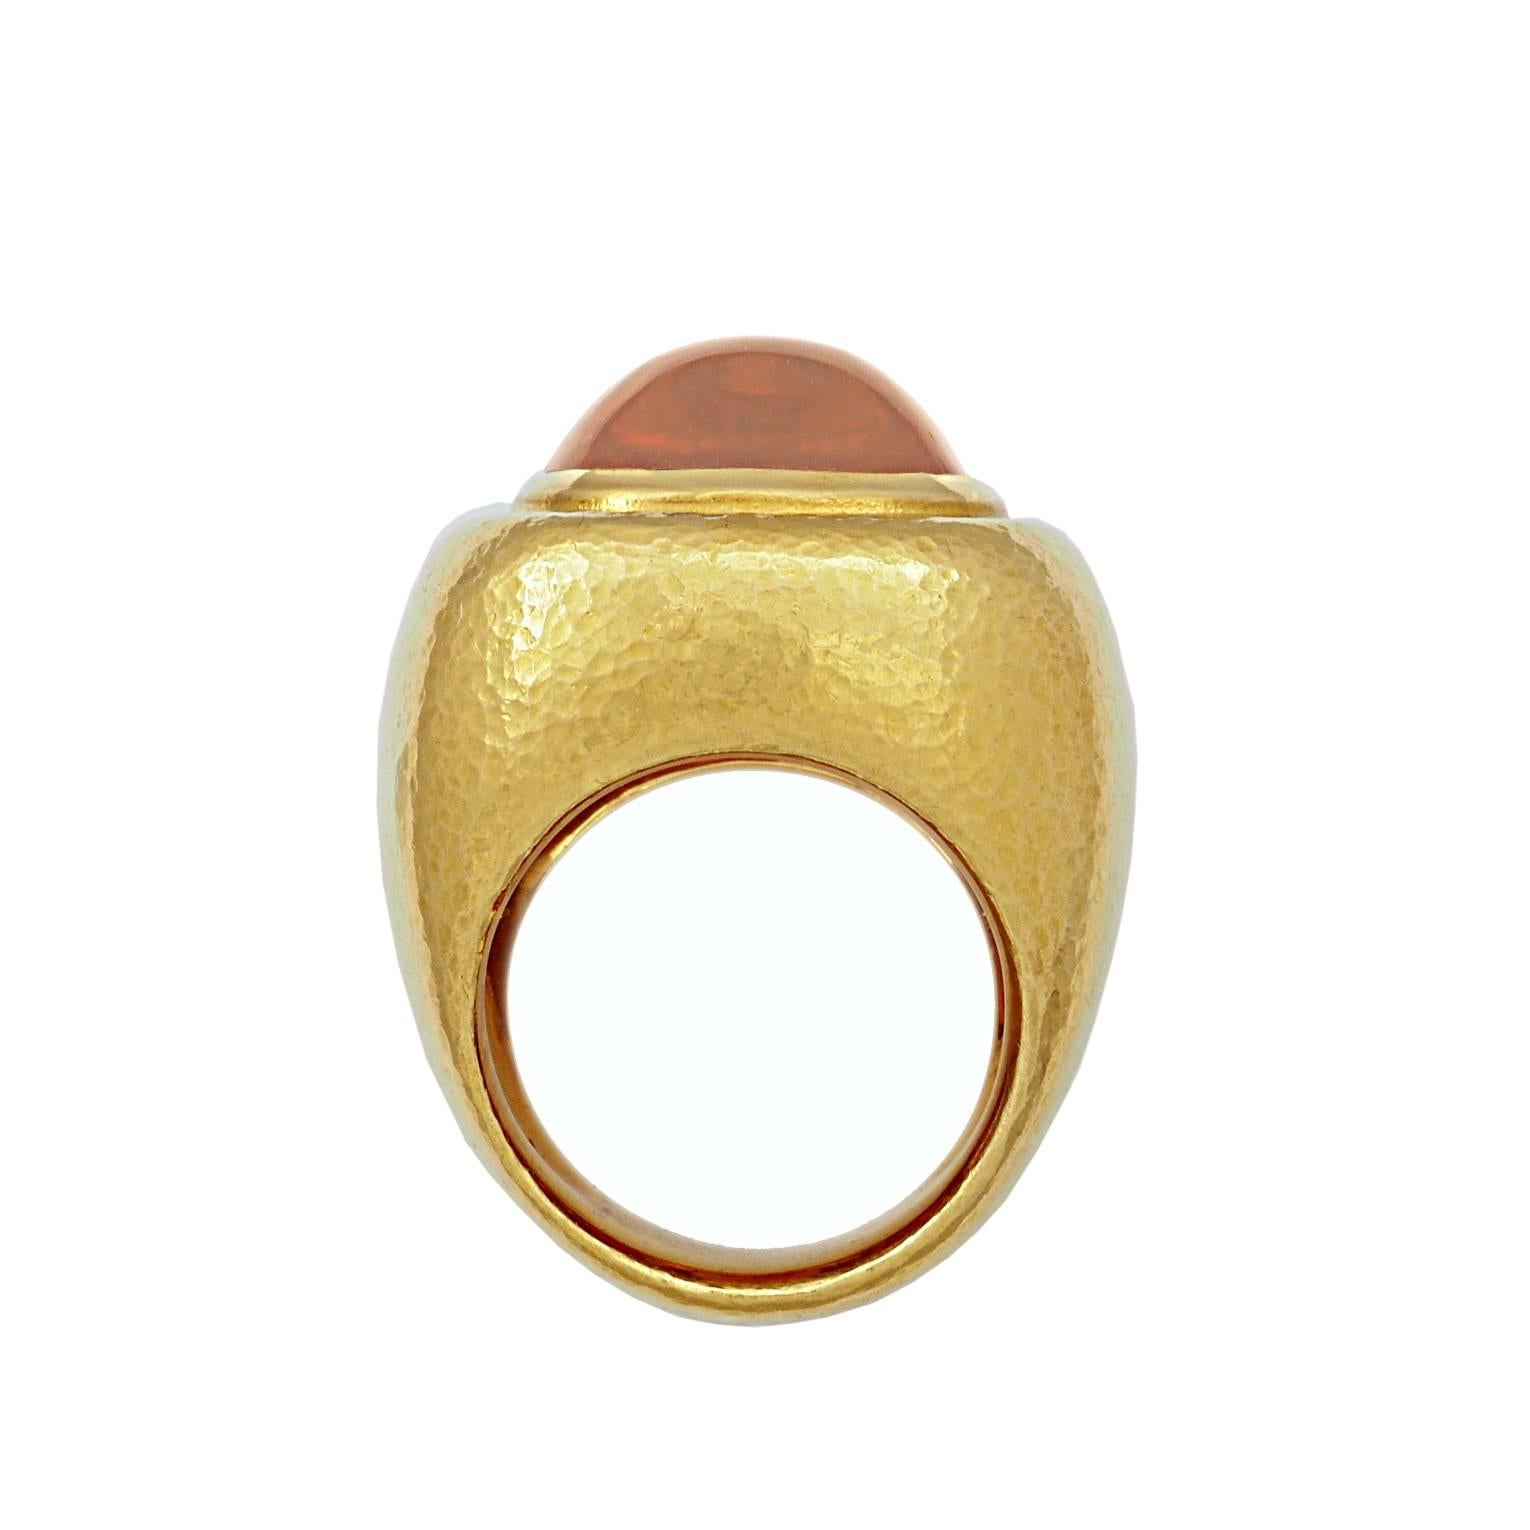 This glorious honey-colored citrine cabochon is set in a bulky 22k hammered yellow gold ring designed by Colleen B. Rosenblat.
Ring size: 57